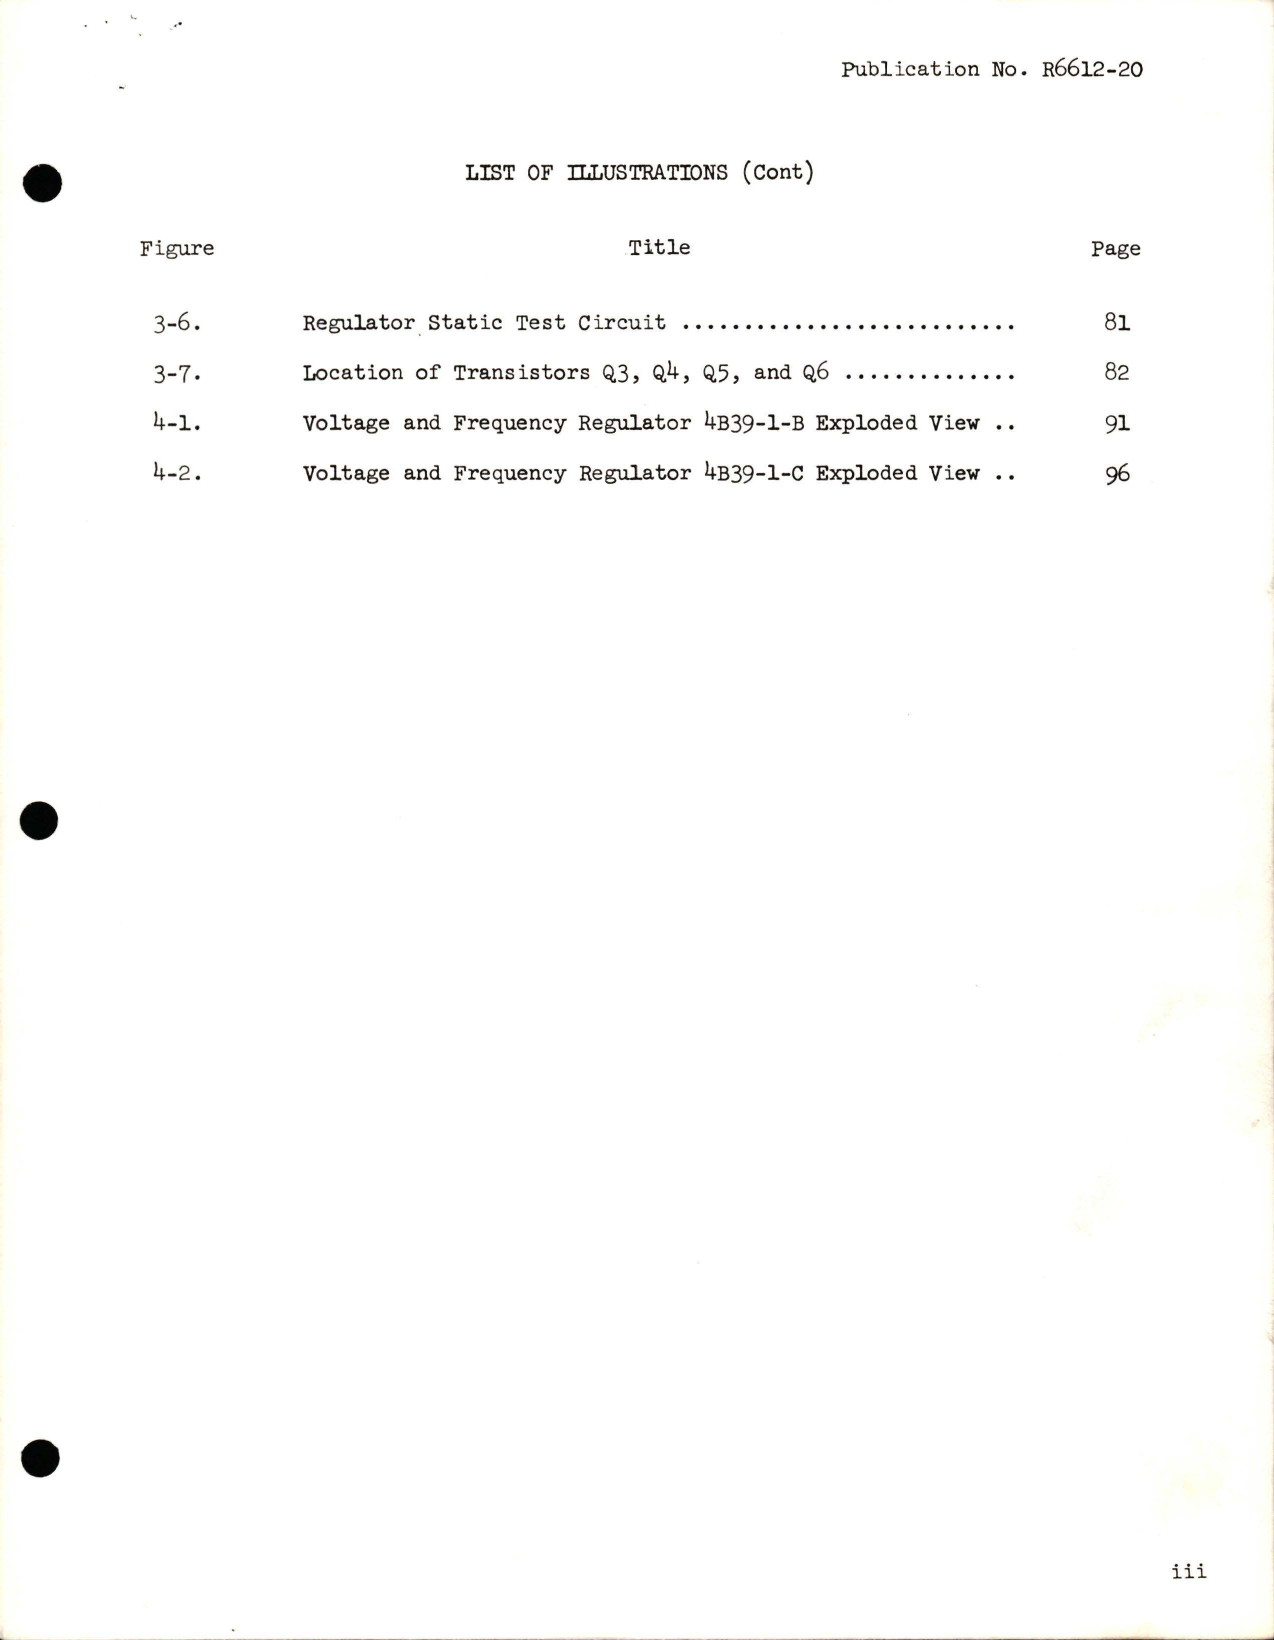 Sample page 5 from AirCorps Library document: Overhaul Instructions with Parts List for Voltage & Frequency Regulator - Types 4B39-1-B, 4B39-1-C